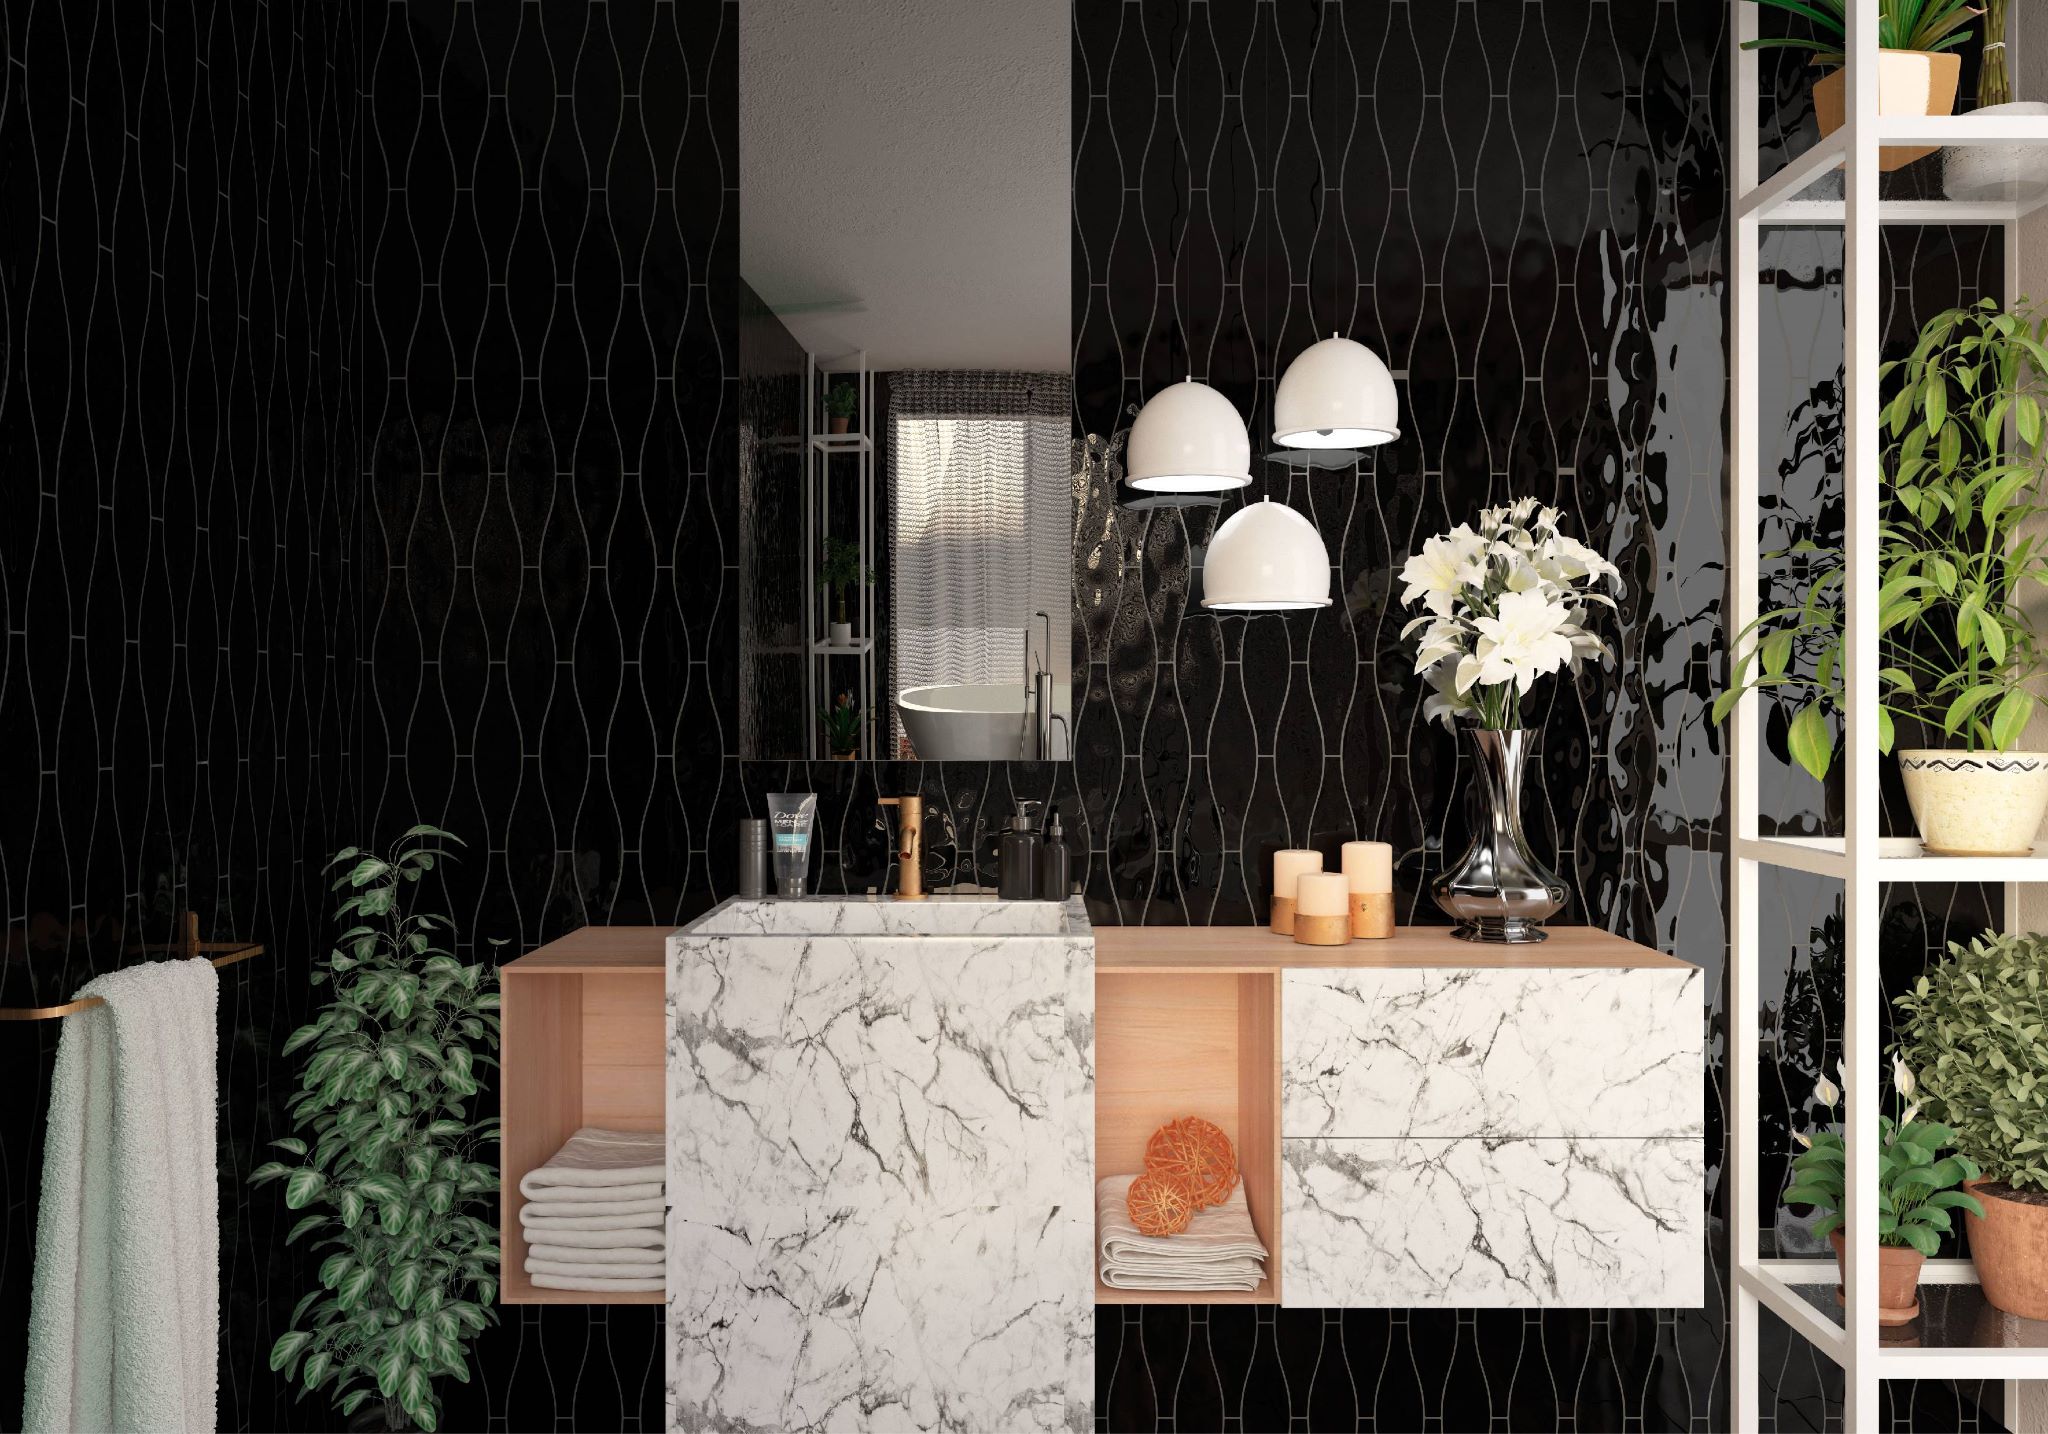 Monochrome_13_G | Stones & More | Finest selection of Mosaics, Glass, Tile and Stone